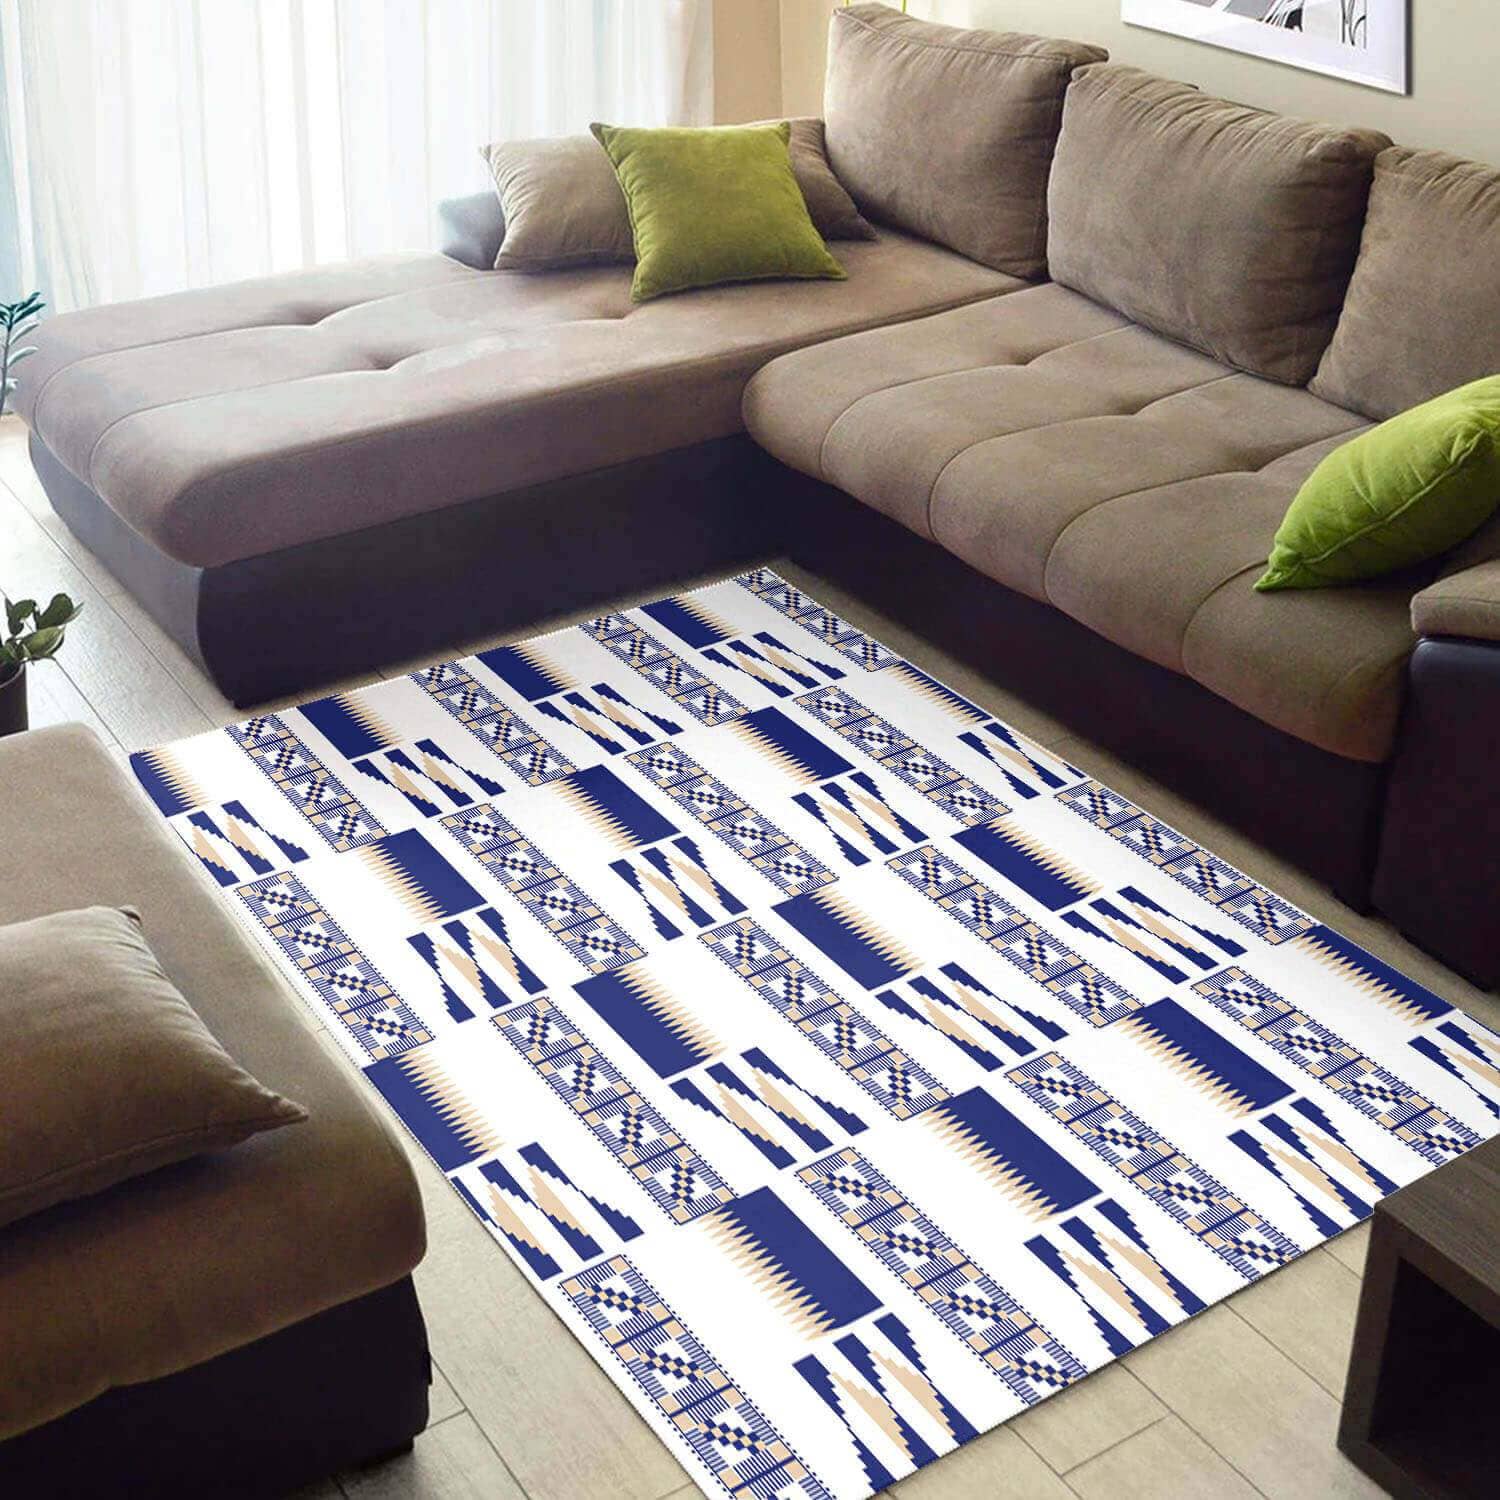 Inspired African Beautiful Afrocentric Pattern Art Themed Carpet House Rug